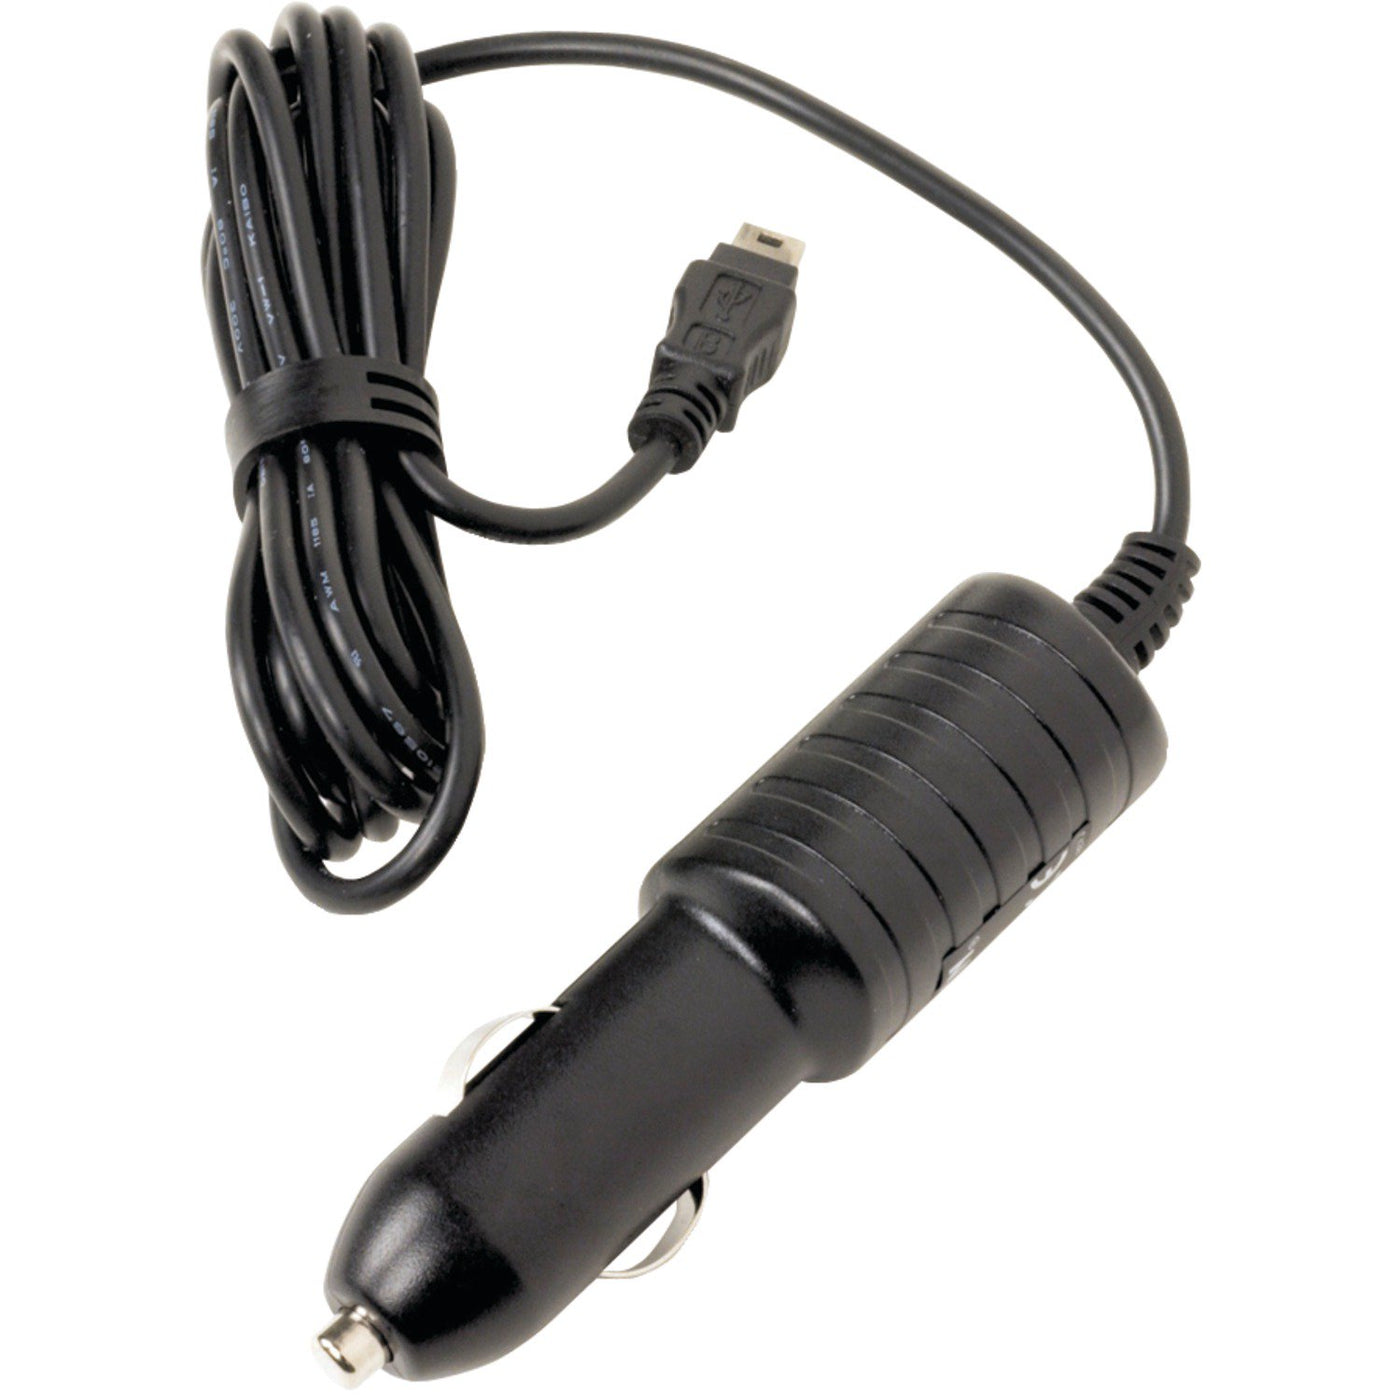 12-volt Adapter Cable